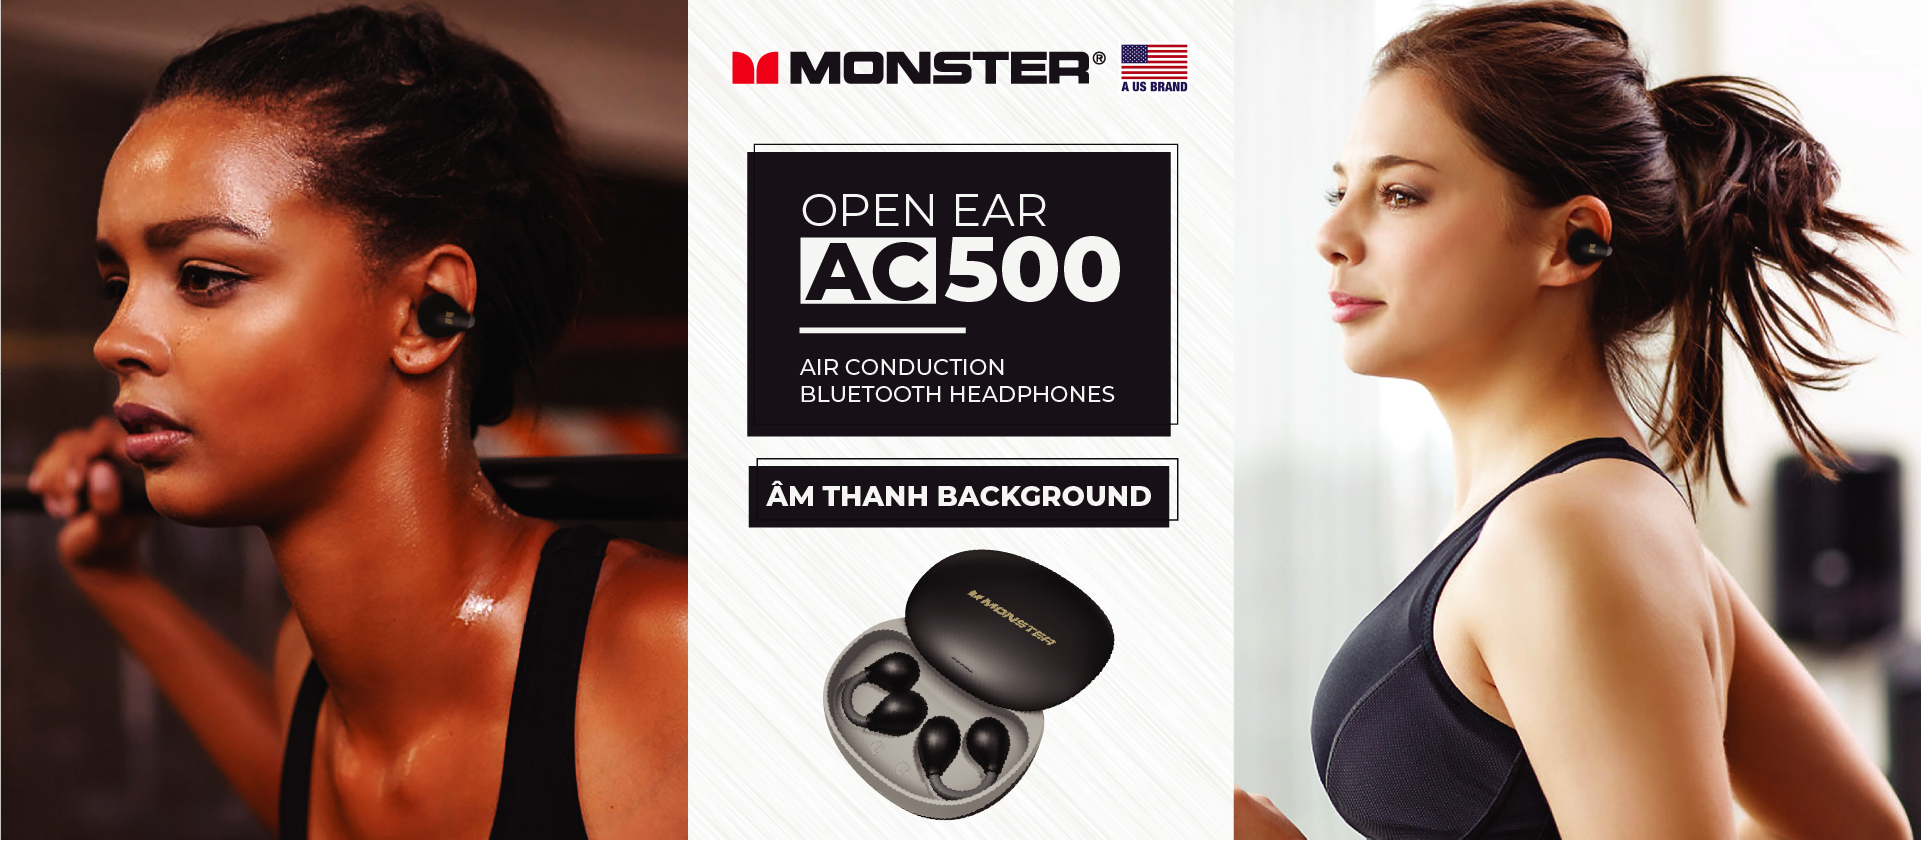 Tai Nghe True Wireless Open-Ear Monster AC500 | Anh Duy Audio